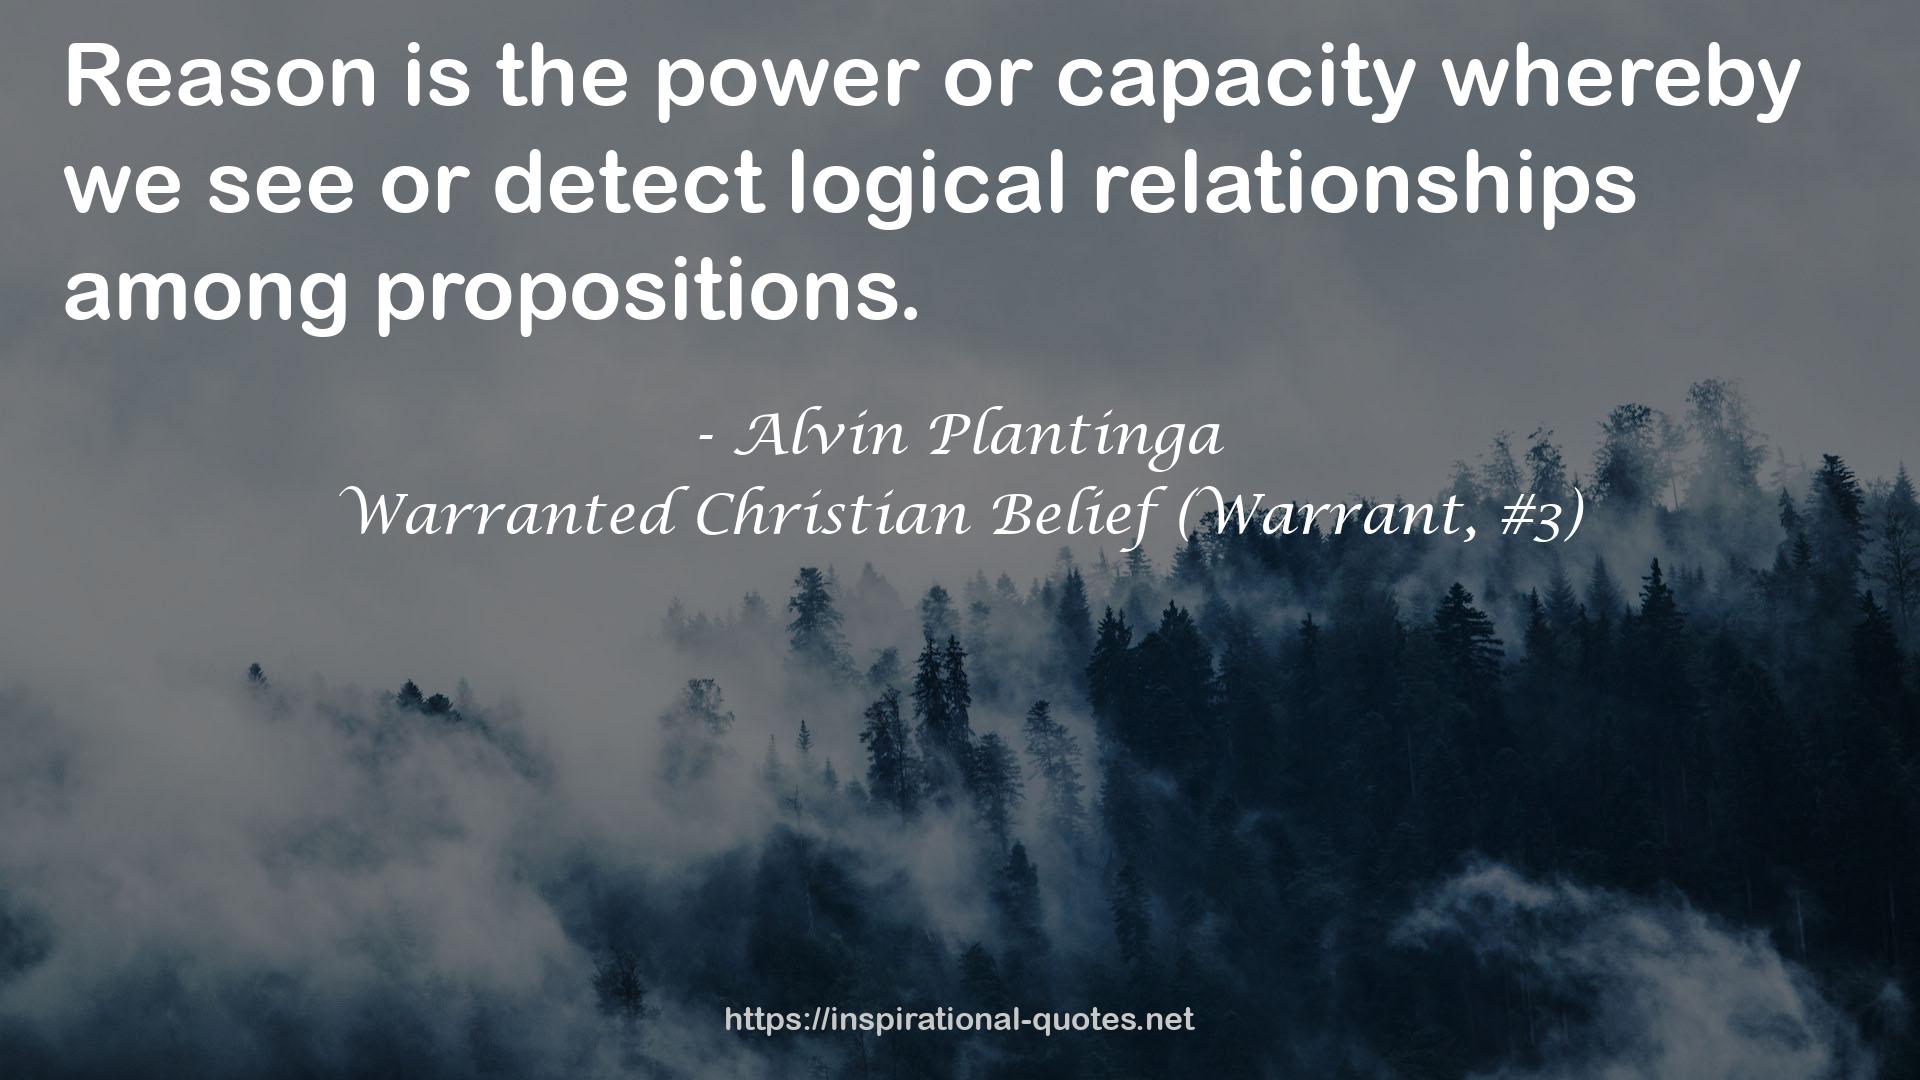 Warranted Christian Belief (Warrant, #3) QUOTES